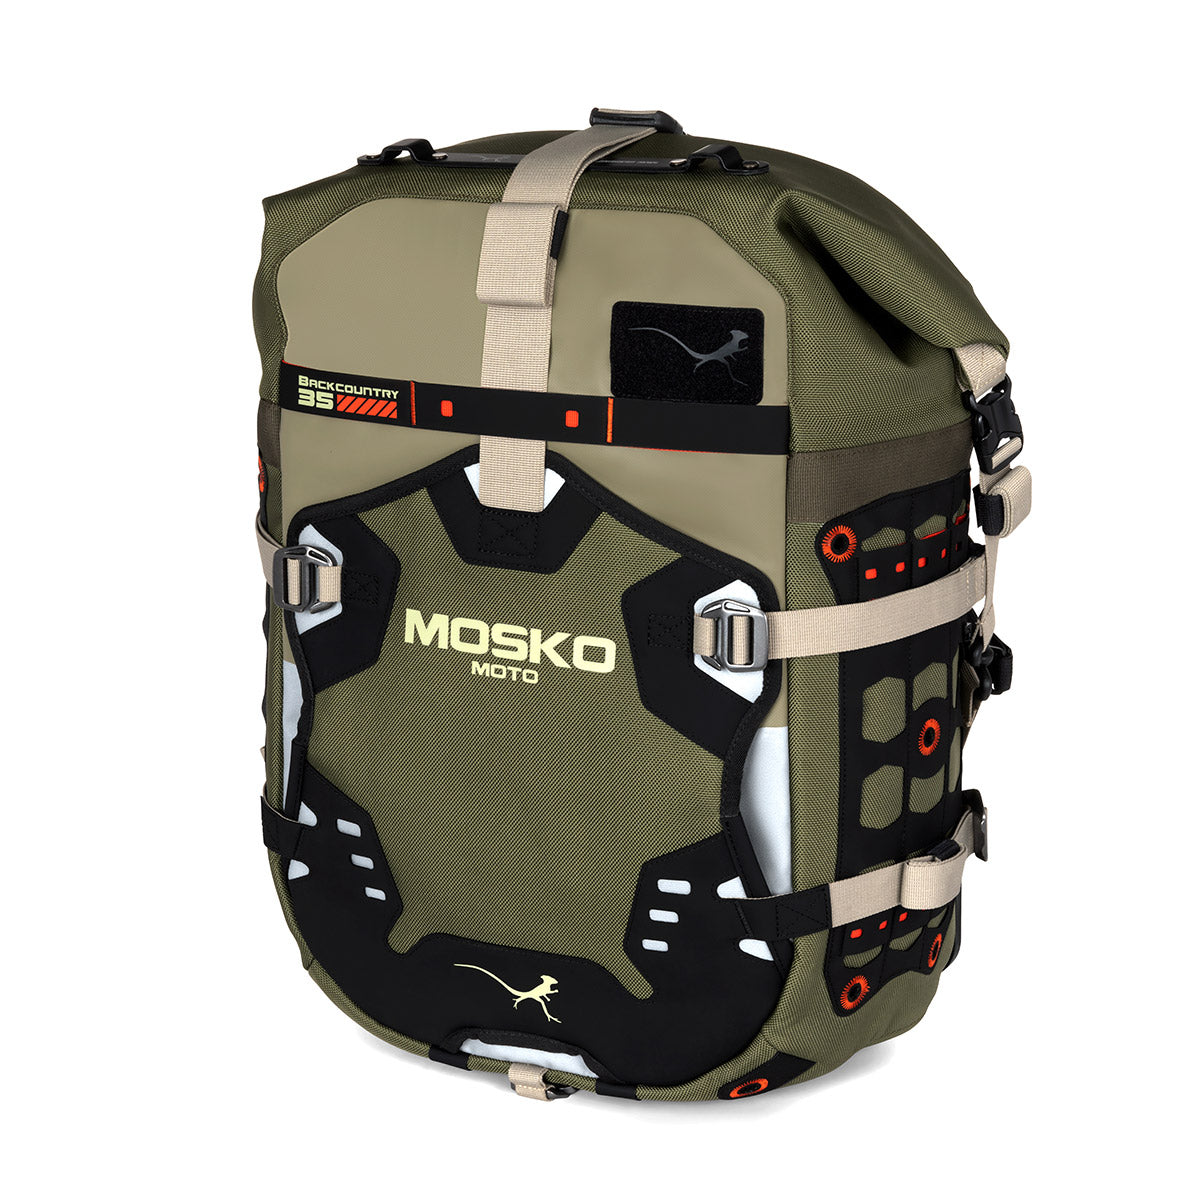 Mini or NoMini? Reviewing one of the new Mosko Moto tankbags. - YouTube